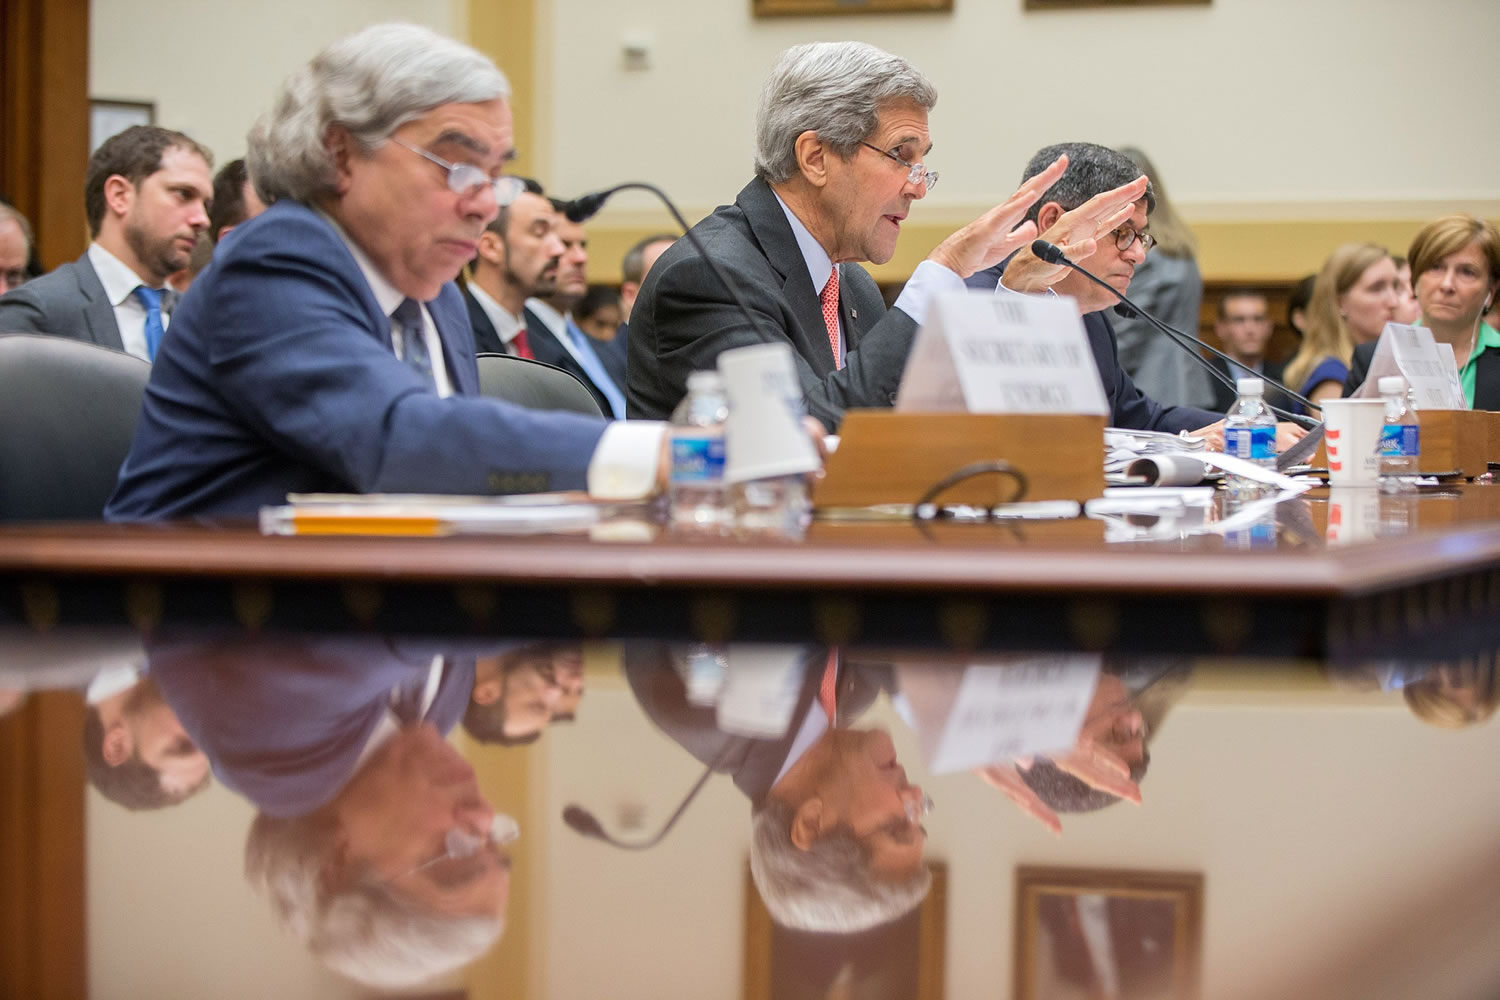 Secretary of State John Kerry, center, flanked by Treasury Secretary Jacob Lew, right, and Energy Secretary Ernest Moniz, testifies on Capitol Hill in Washington on Tuesday before the House Foreign Affairs Committee hearing on the Iran Nuclear Agreement.